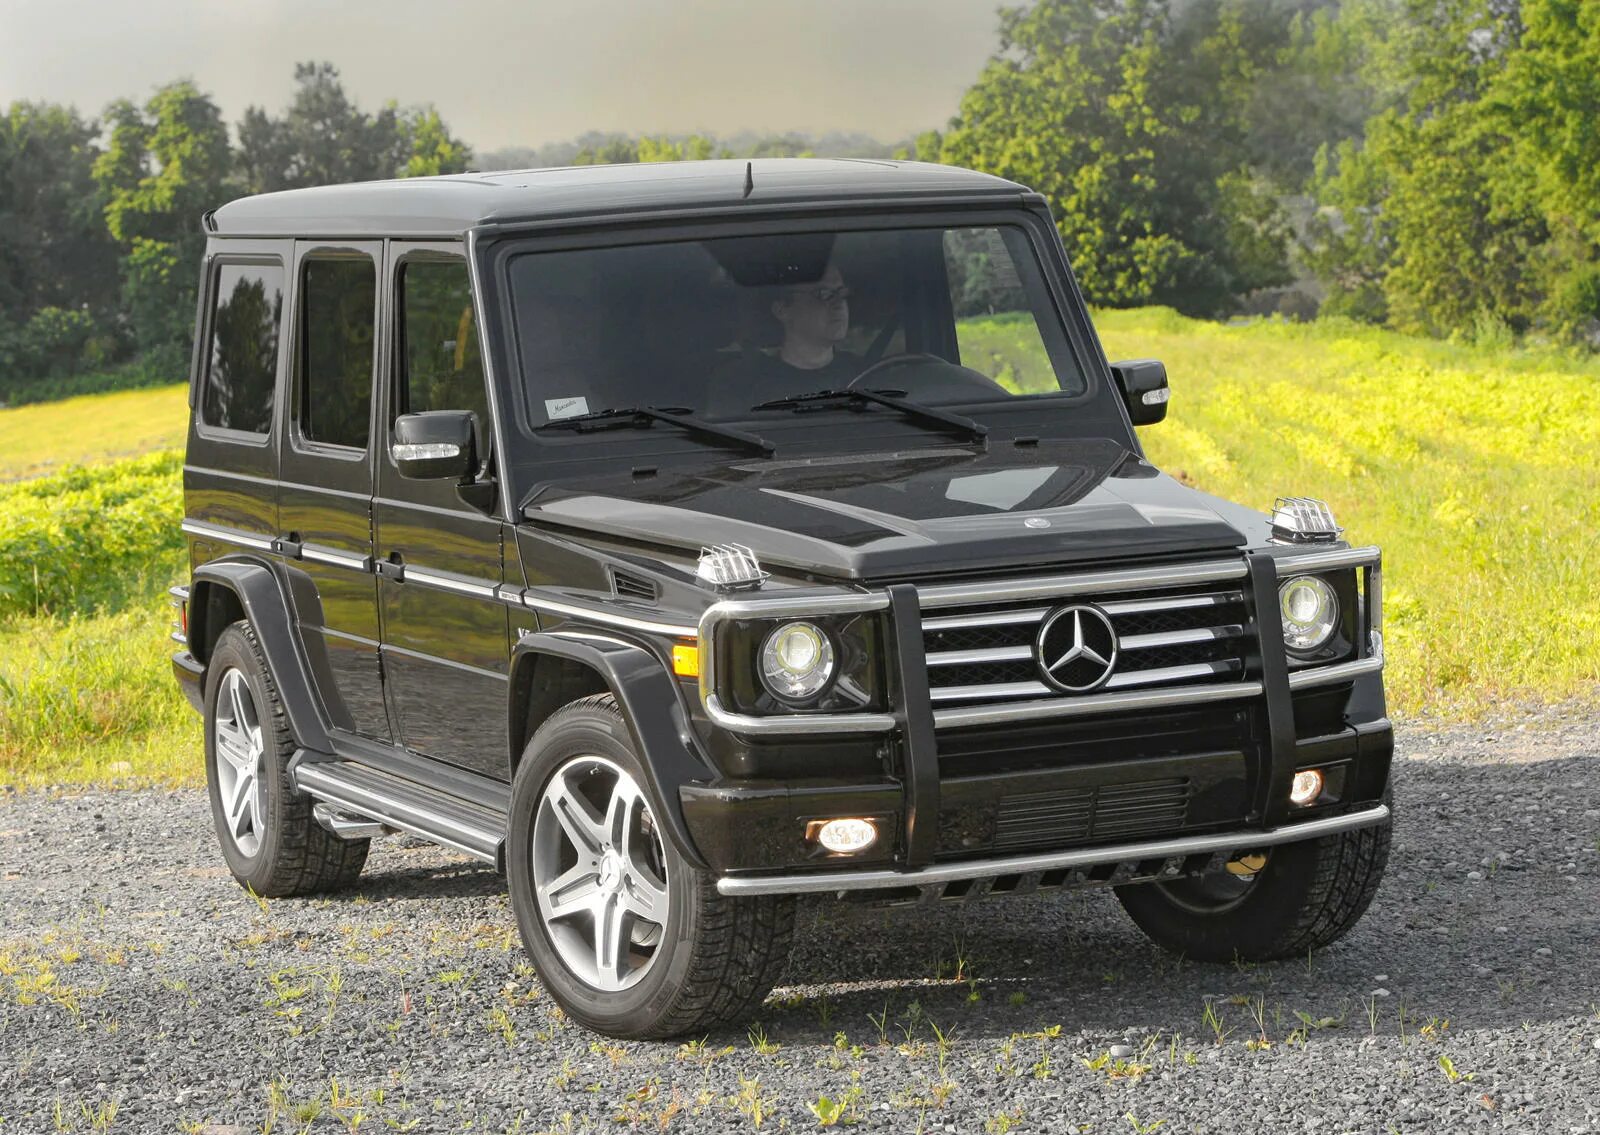 G 55 s. Mercedes Benz g55 AMG. Мерседес Гелендваген 55 АМГ. Mercedes Benz 55 AMG. Мерседес 55 АМГ.